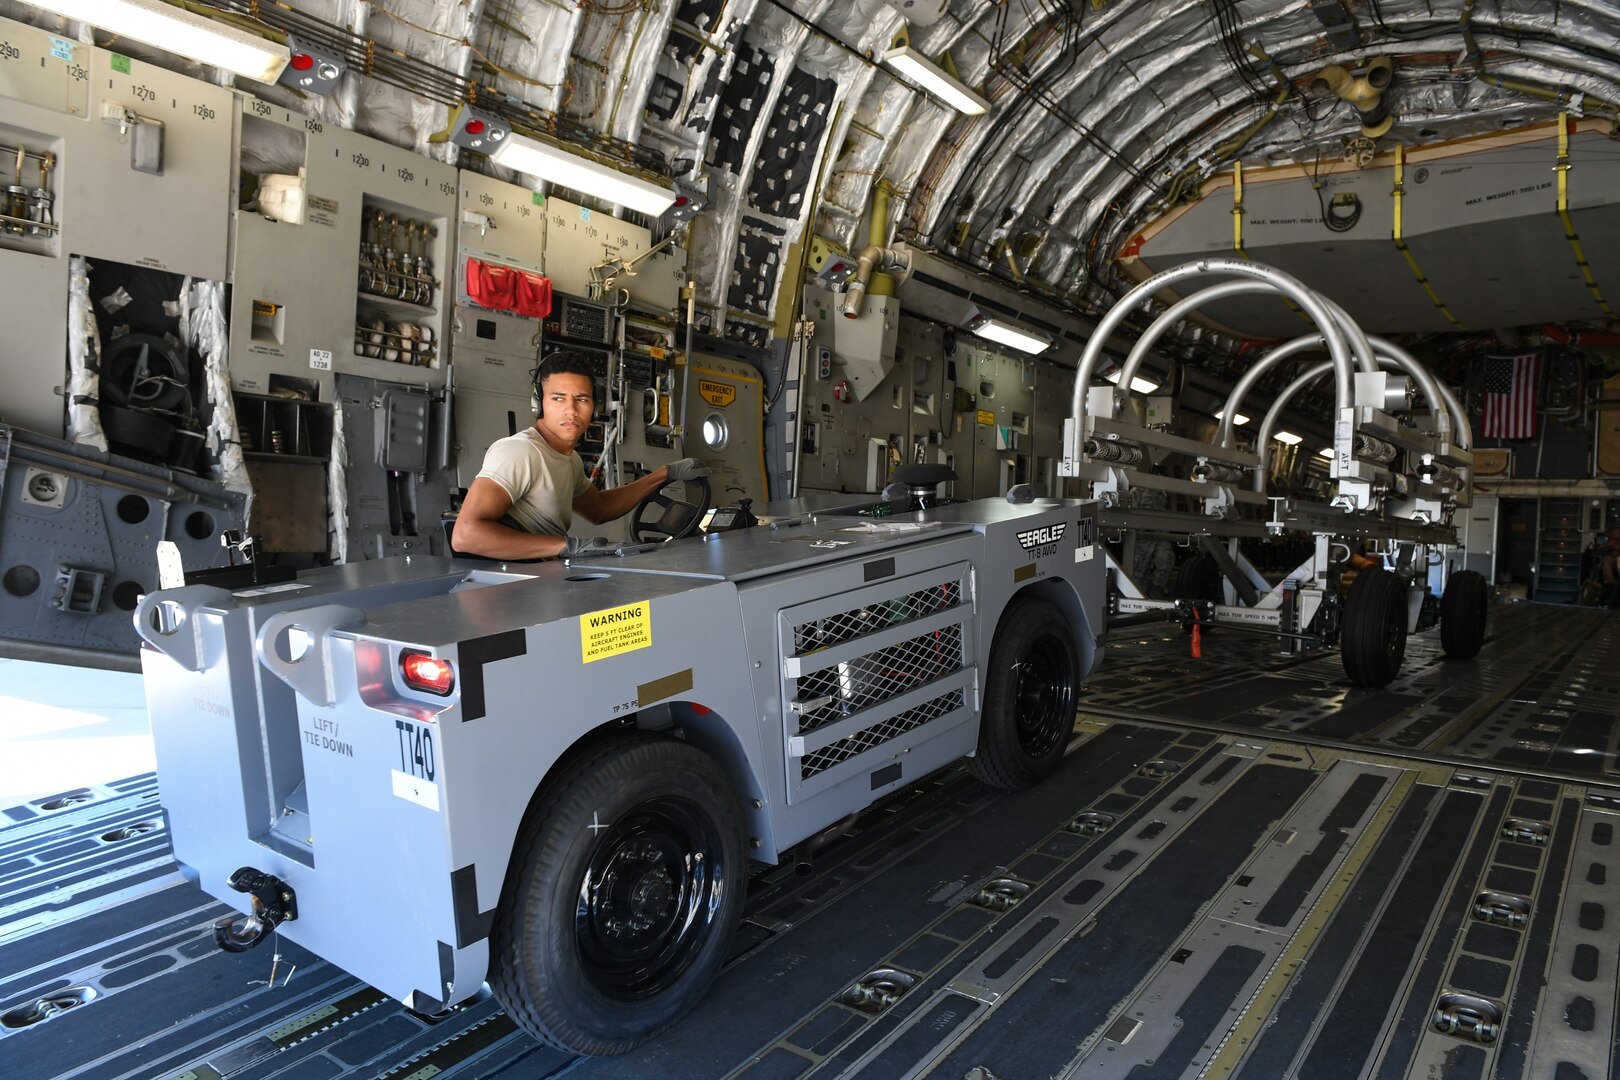 Senior Airman DeShain Calloway, 75th Logistics Readiness Squadron, unloads cargo from a C-17 Globemaster III at Hill Air Force Base, Aug. 9, 2019. The C-17 is attached to the Reserve 89th Airlift Squadron assigned to the 445th Aircraft Wing out of Wright-Patterson AFB, Ohio. (U.S. Air Force photo by Cynthia Griggs)